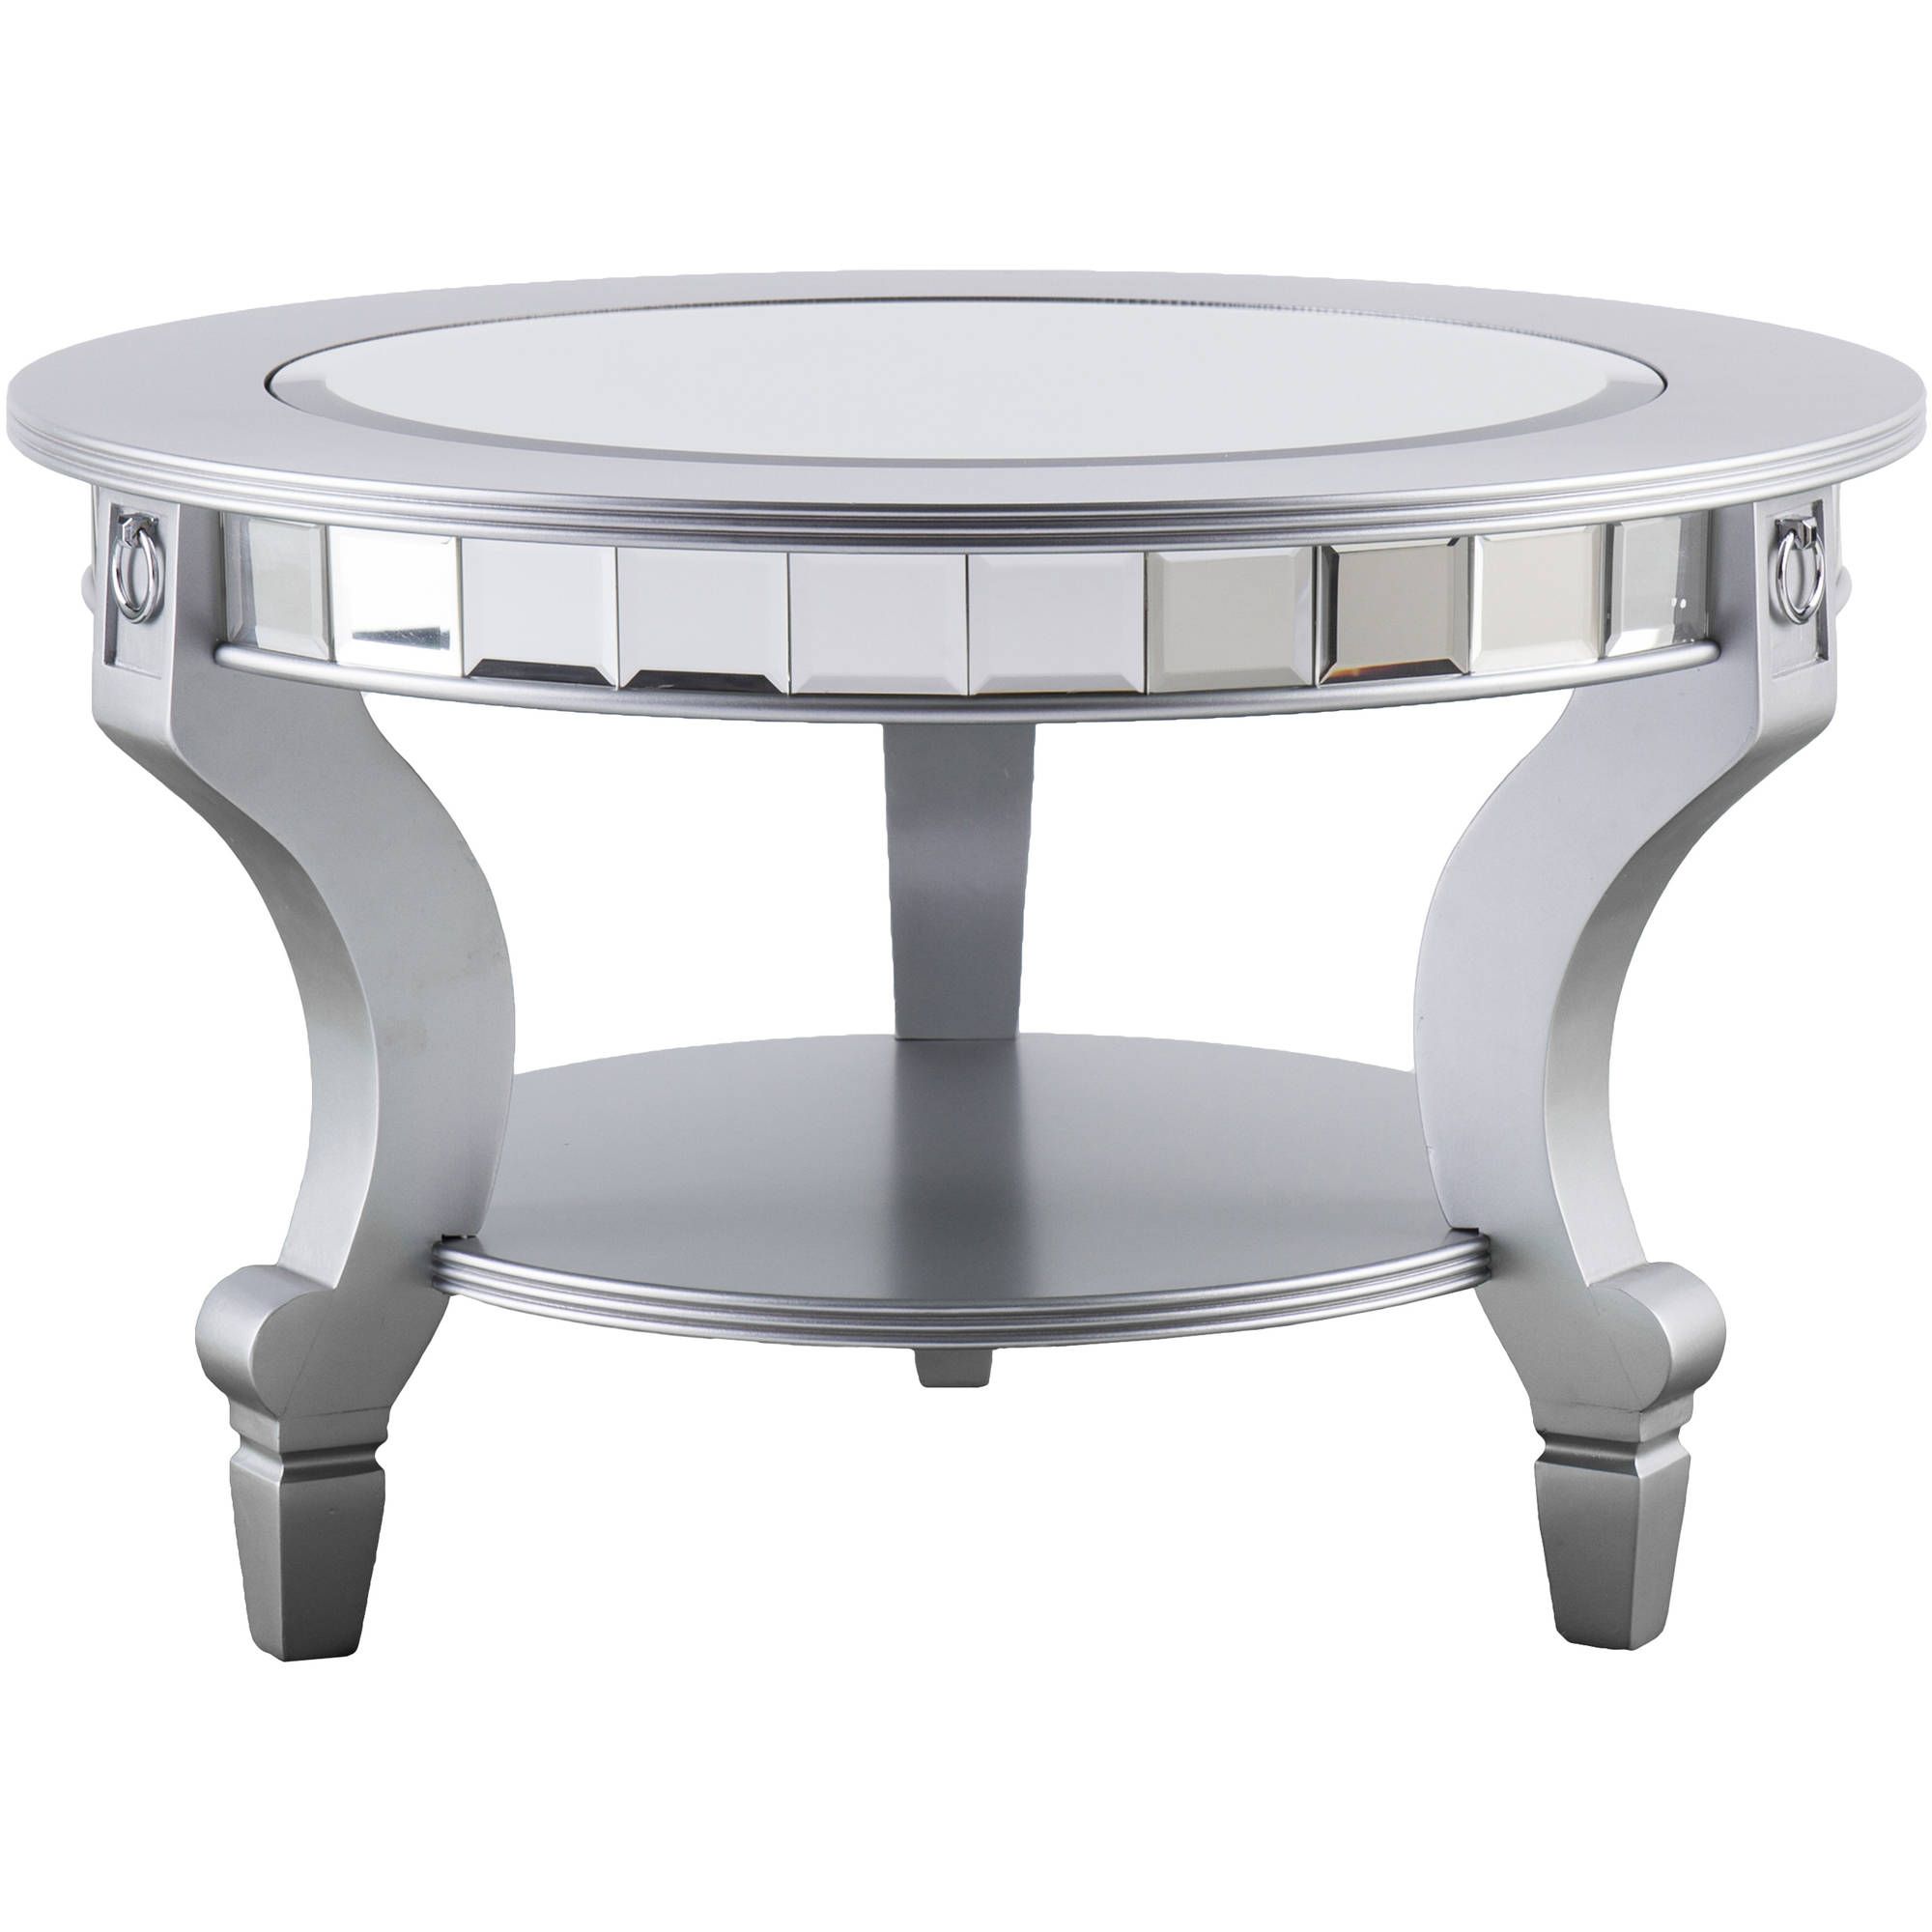 Well Liked Round Coffee Tables Within Elegant Round Glam Mirrored Mosaic Coffee Table Cocktail Table, Matte (View 7 of 10)